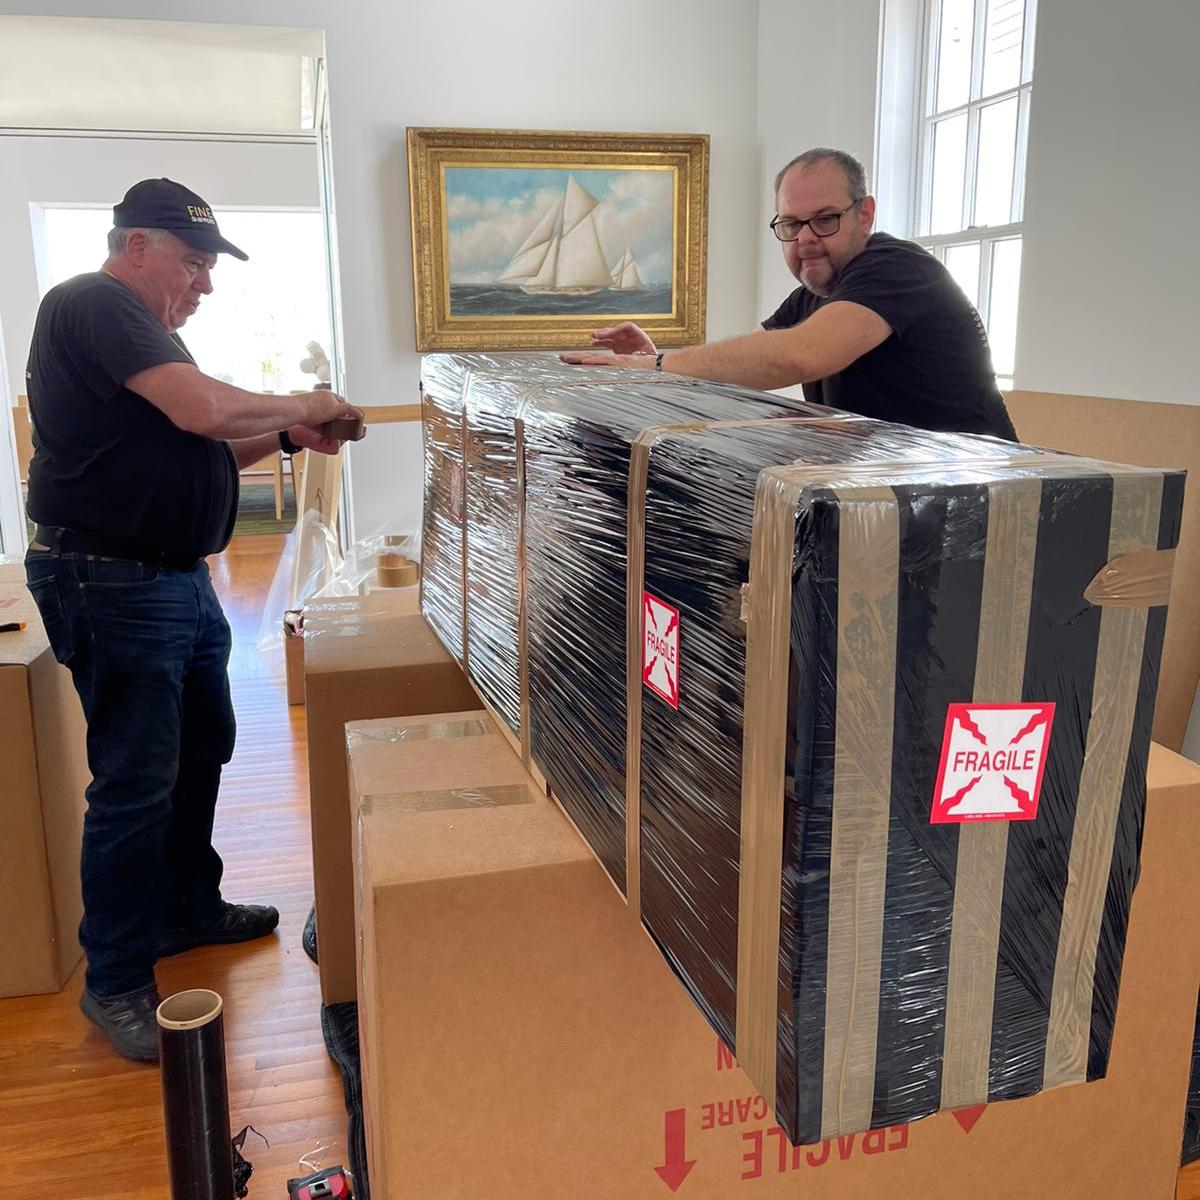 Professional Art Delivery Service in Nantucket, Massachusetts